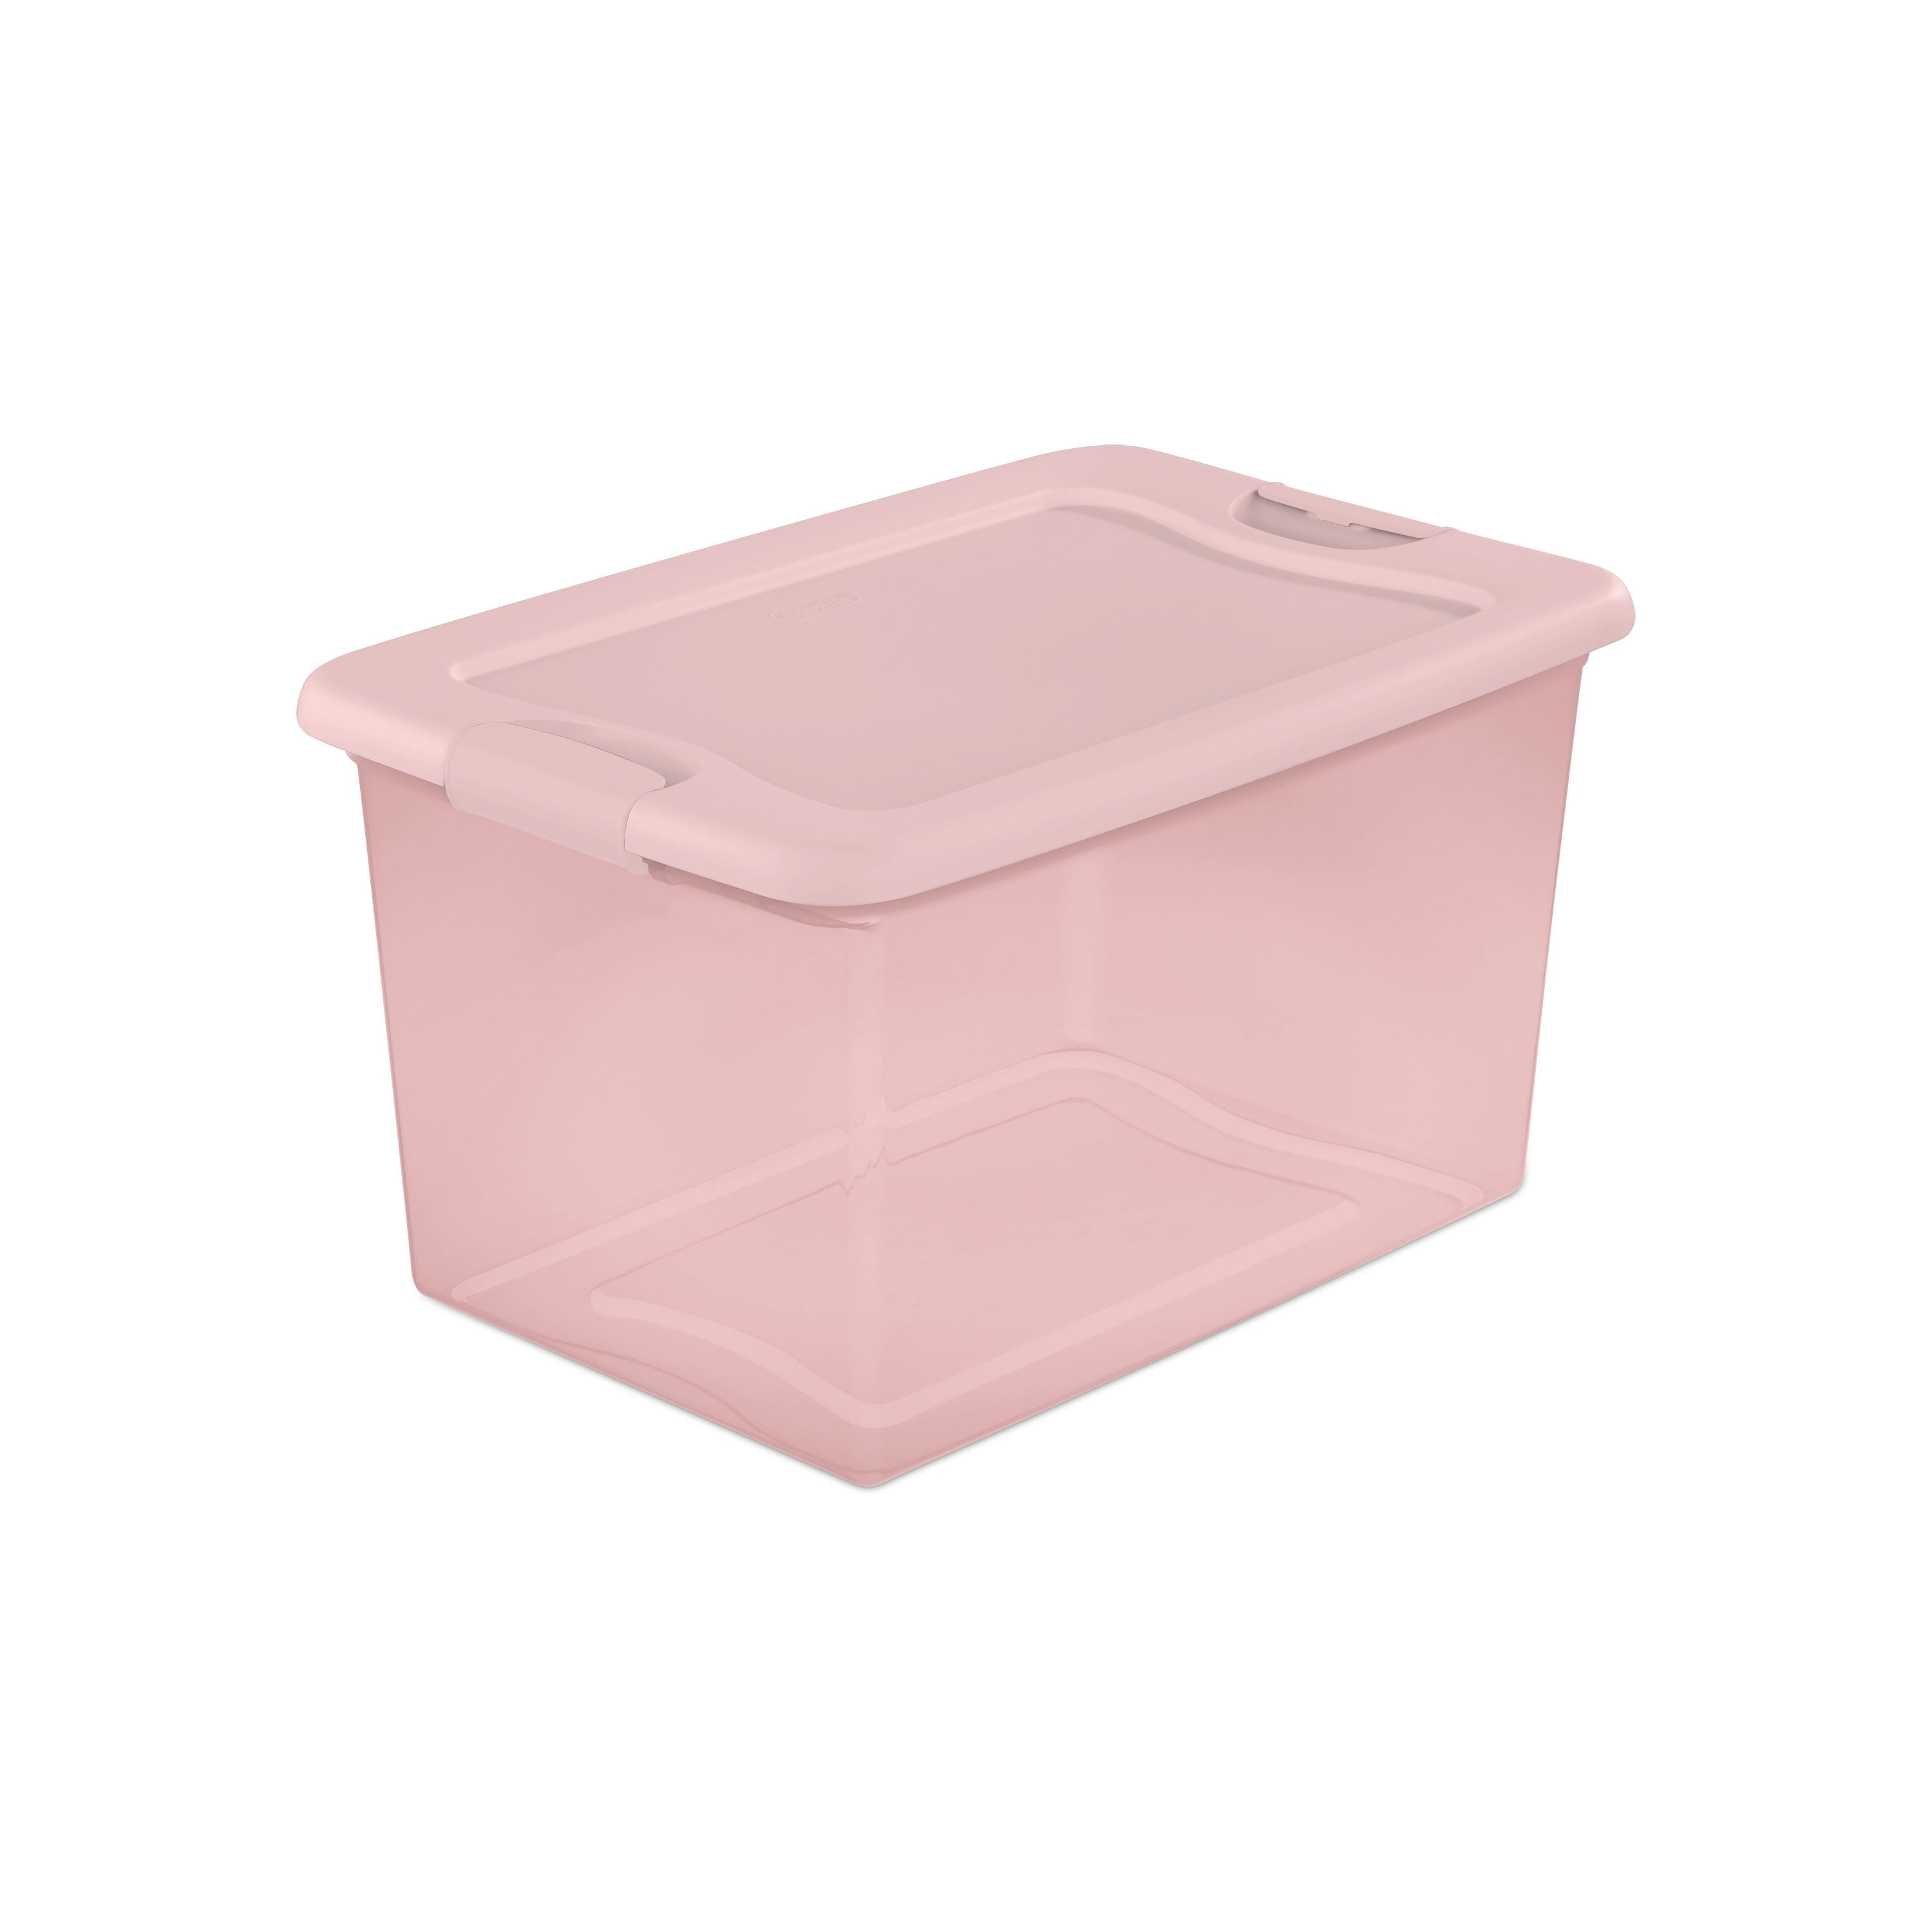 Sterilite 116 Quart Ultra Latching Storage Tote Box Container Clear, 8-Pack